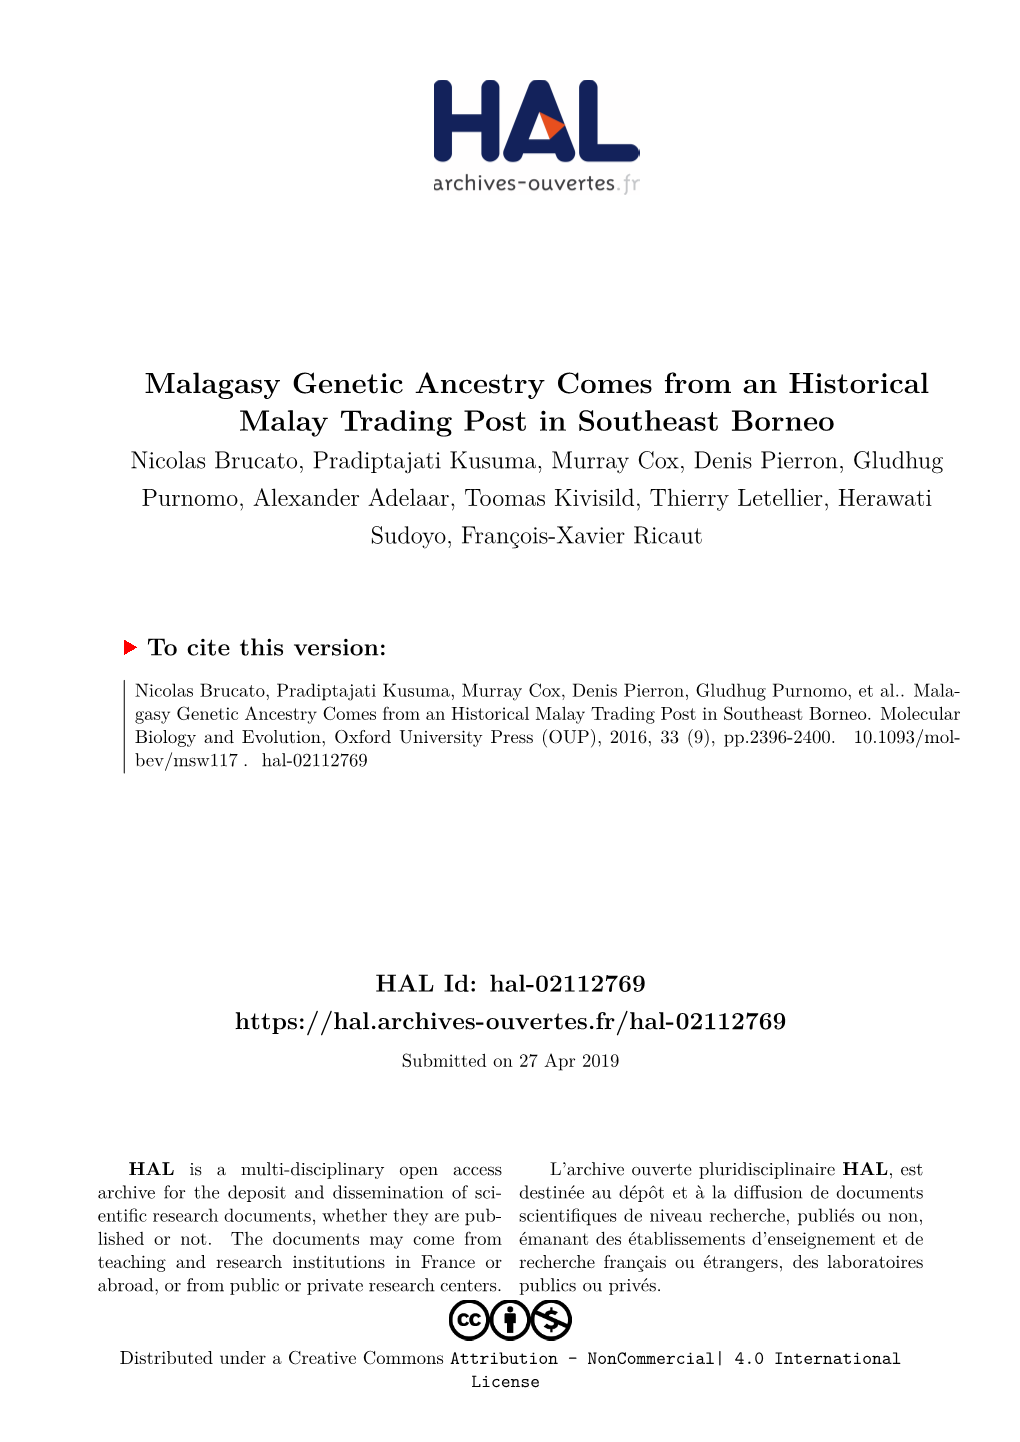 Malagasy Genetic Ancestry Comes from an Historical Malay Trading Post in Southeast Borneo